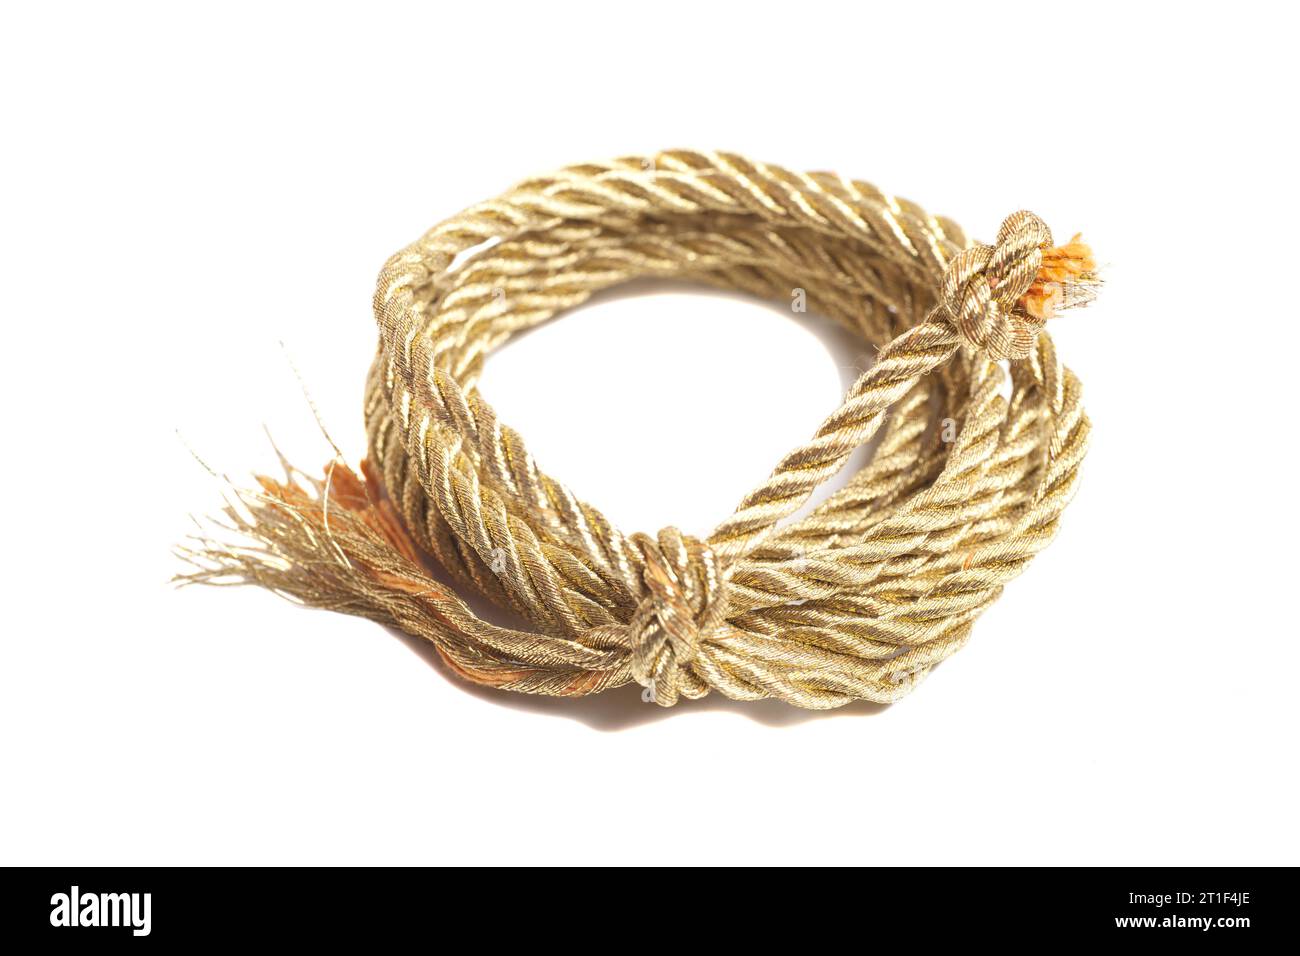 Golden rope isolated on a white background Stock Photo